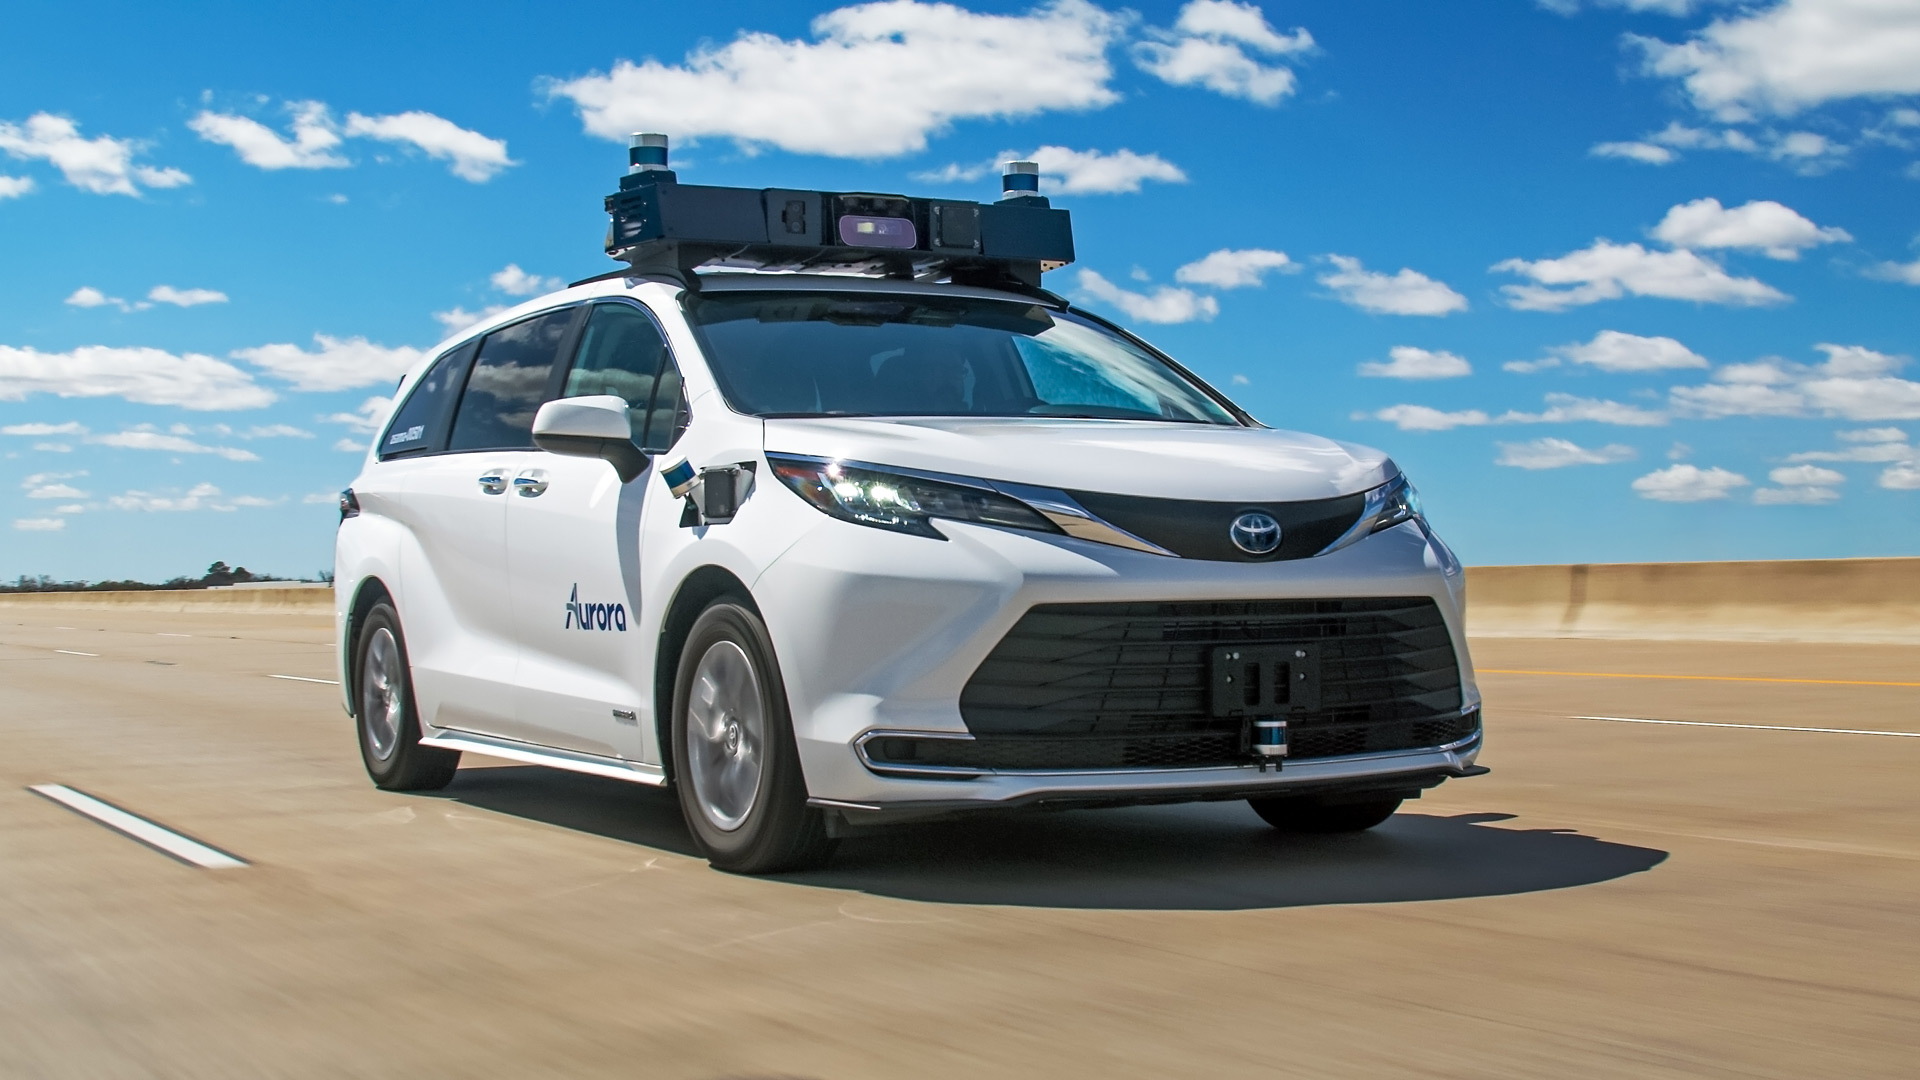 Toyota and Aurora self-driving car prototype